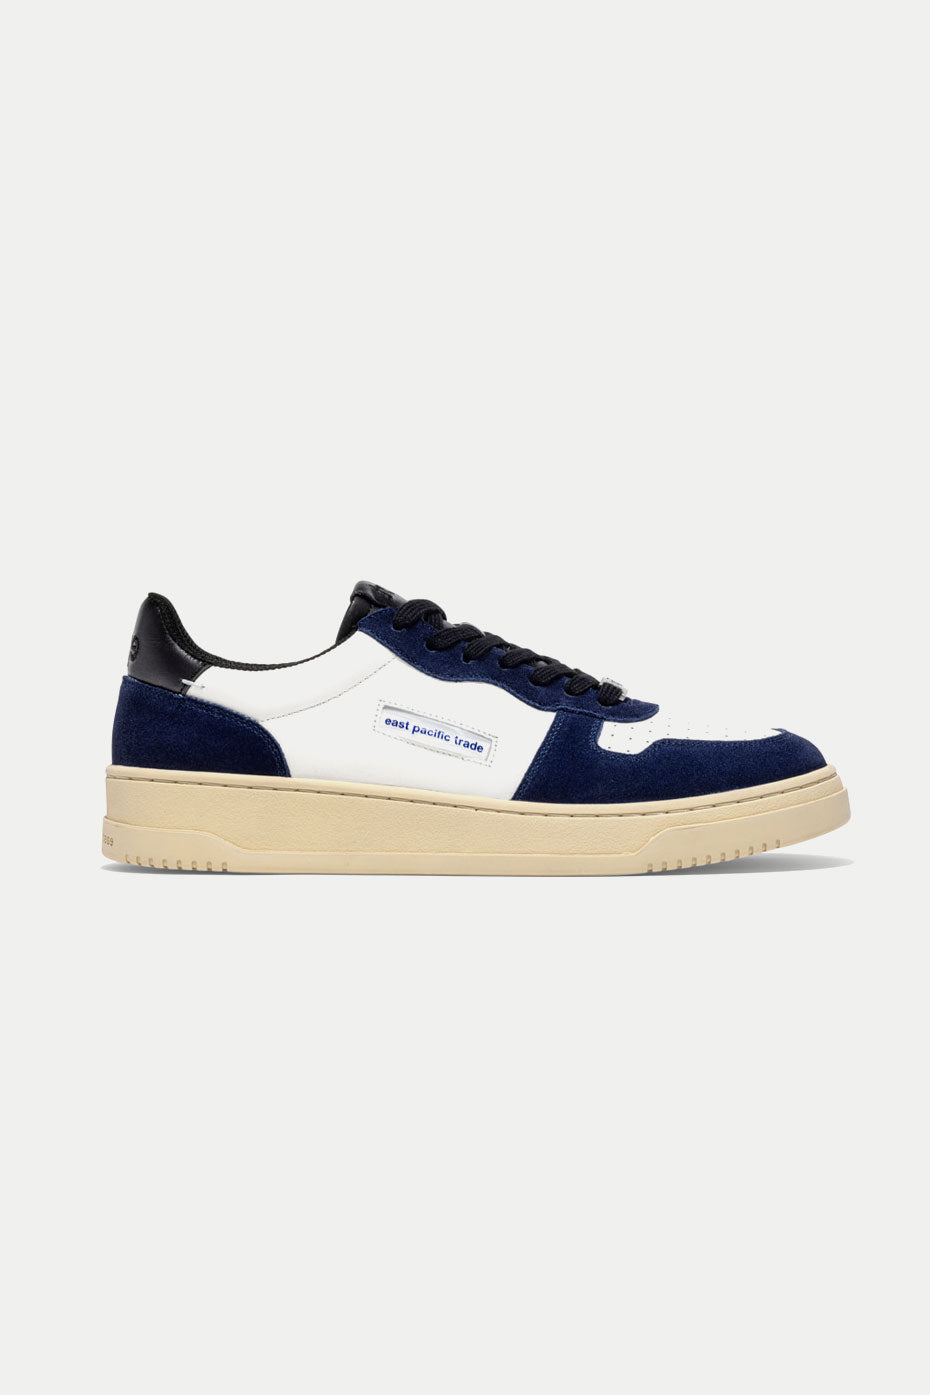 East Pacific Trade Navy White Court Trainer Mens